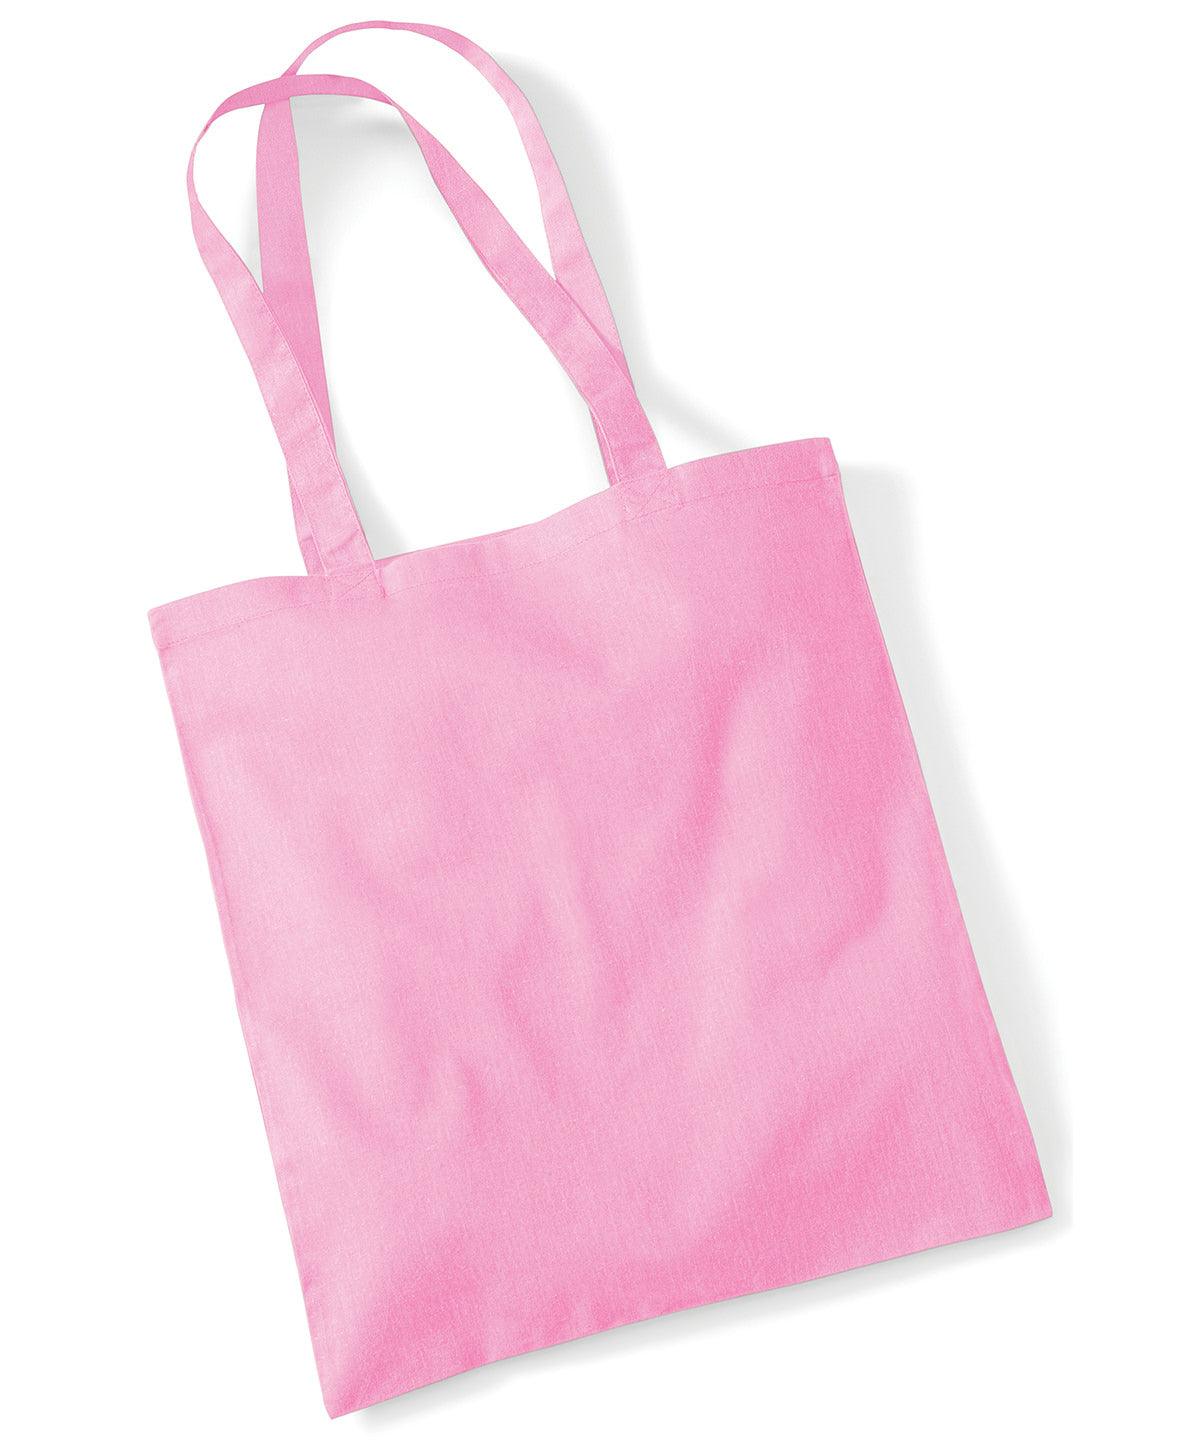 Classic Pink - Bag for life - long handles Bags Westford Mill Bags & Luggage, Crafting, Must Haves, Rebrandable Schoolwear Centres